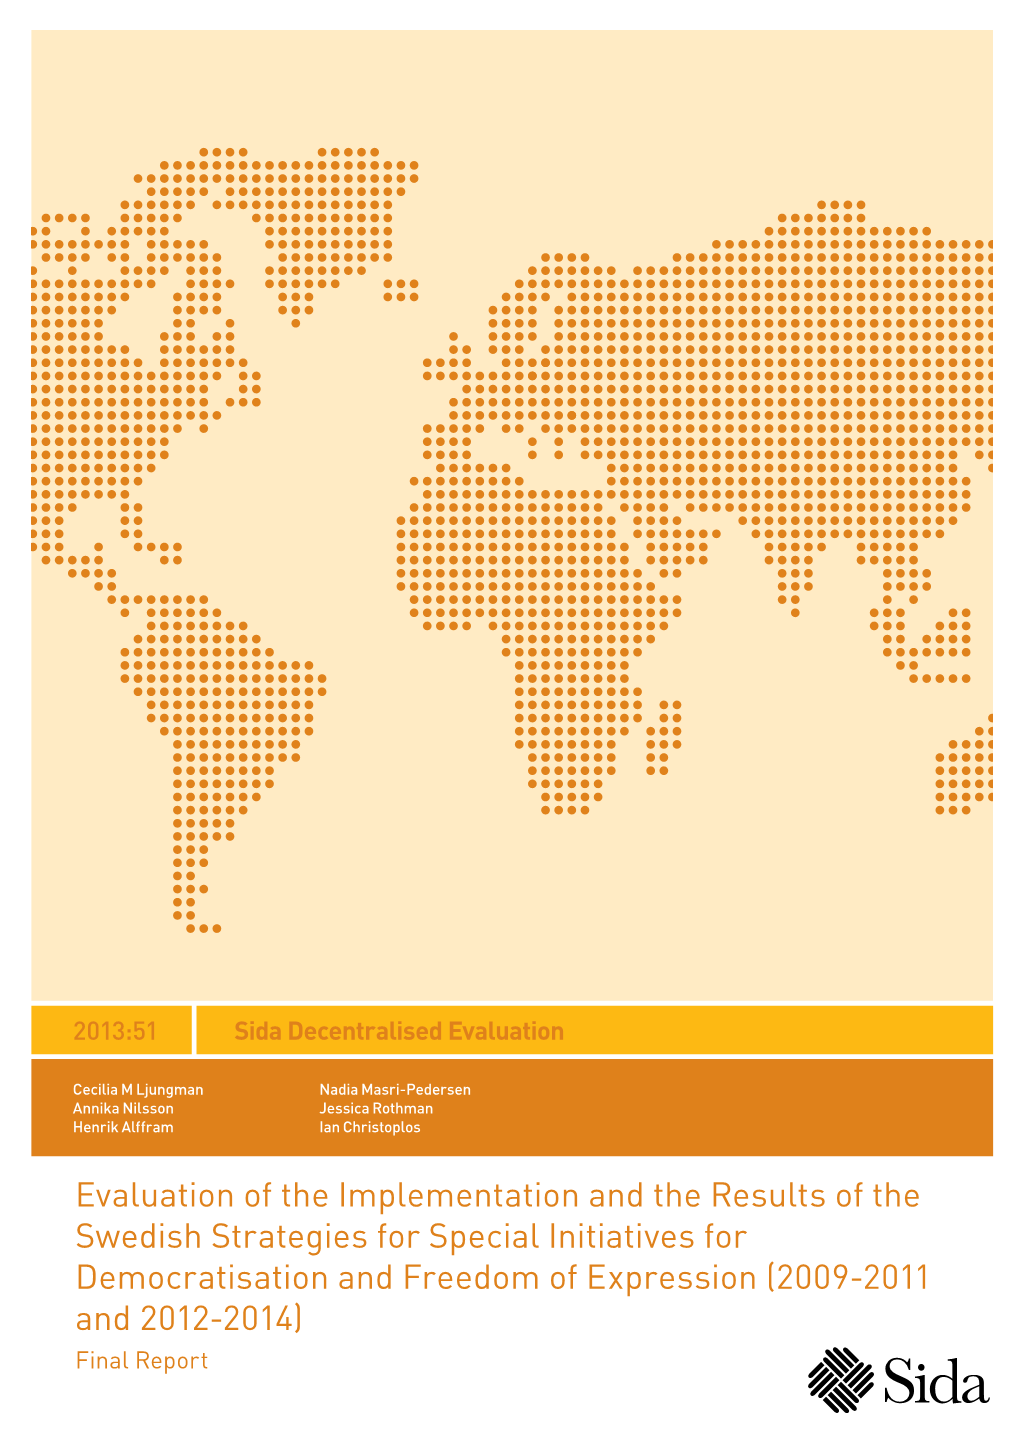 Evaluation of the Implementation and the Results of the Swedish